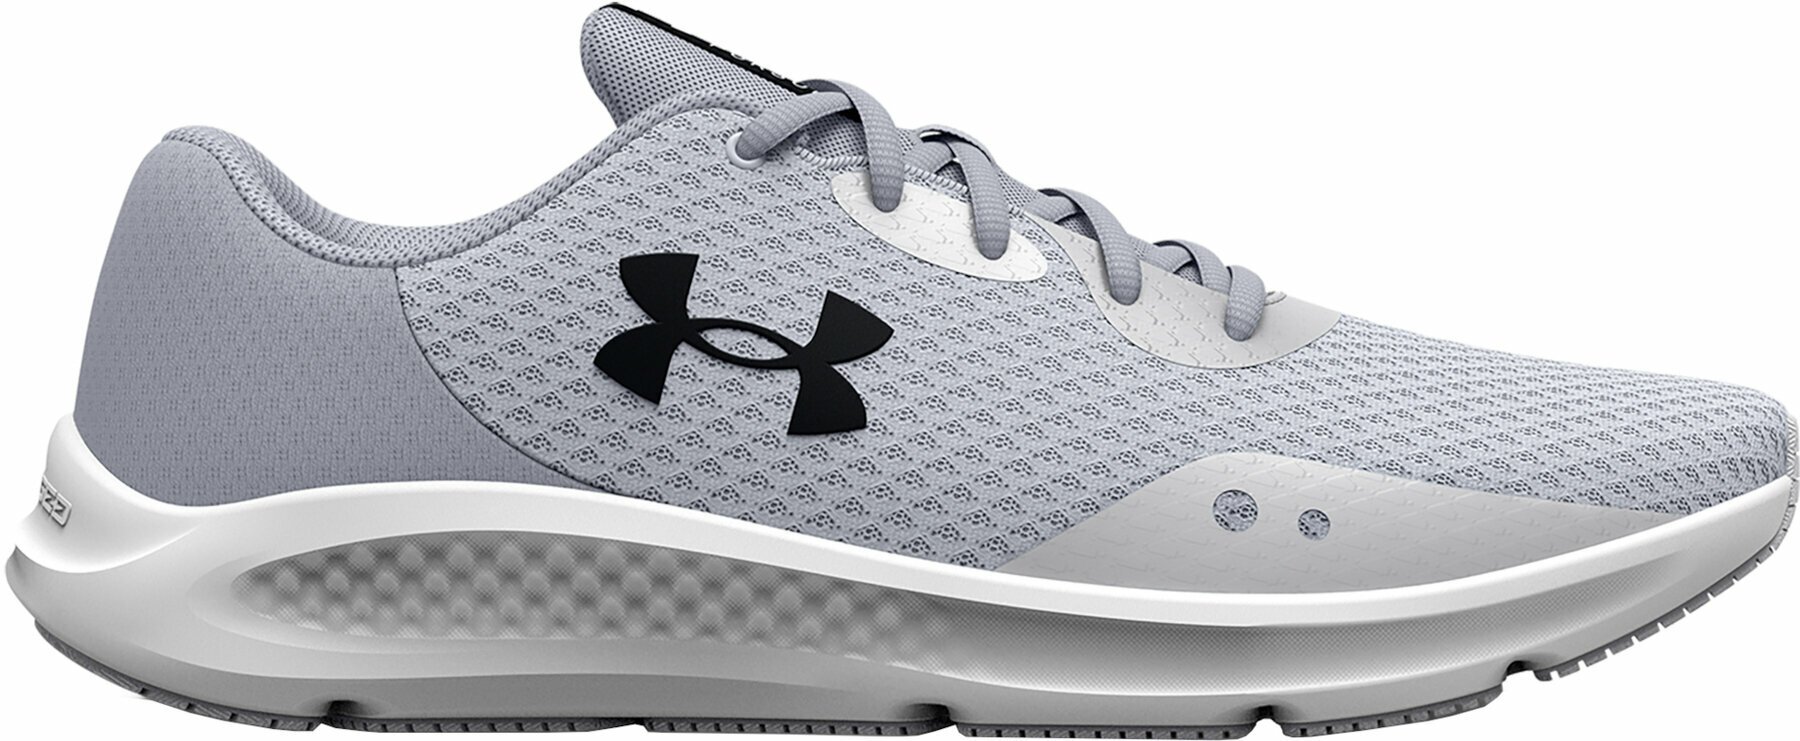 Buty do biegania po asfalcie
 Under Armour Women's UA Charged Pursuit 3 Running Shoes Halo Gray/Mod Gray 38 Buty do biegania po asfalcie